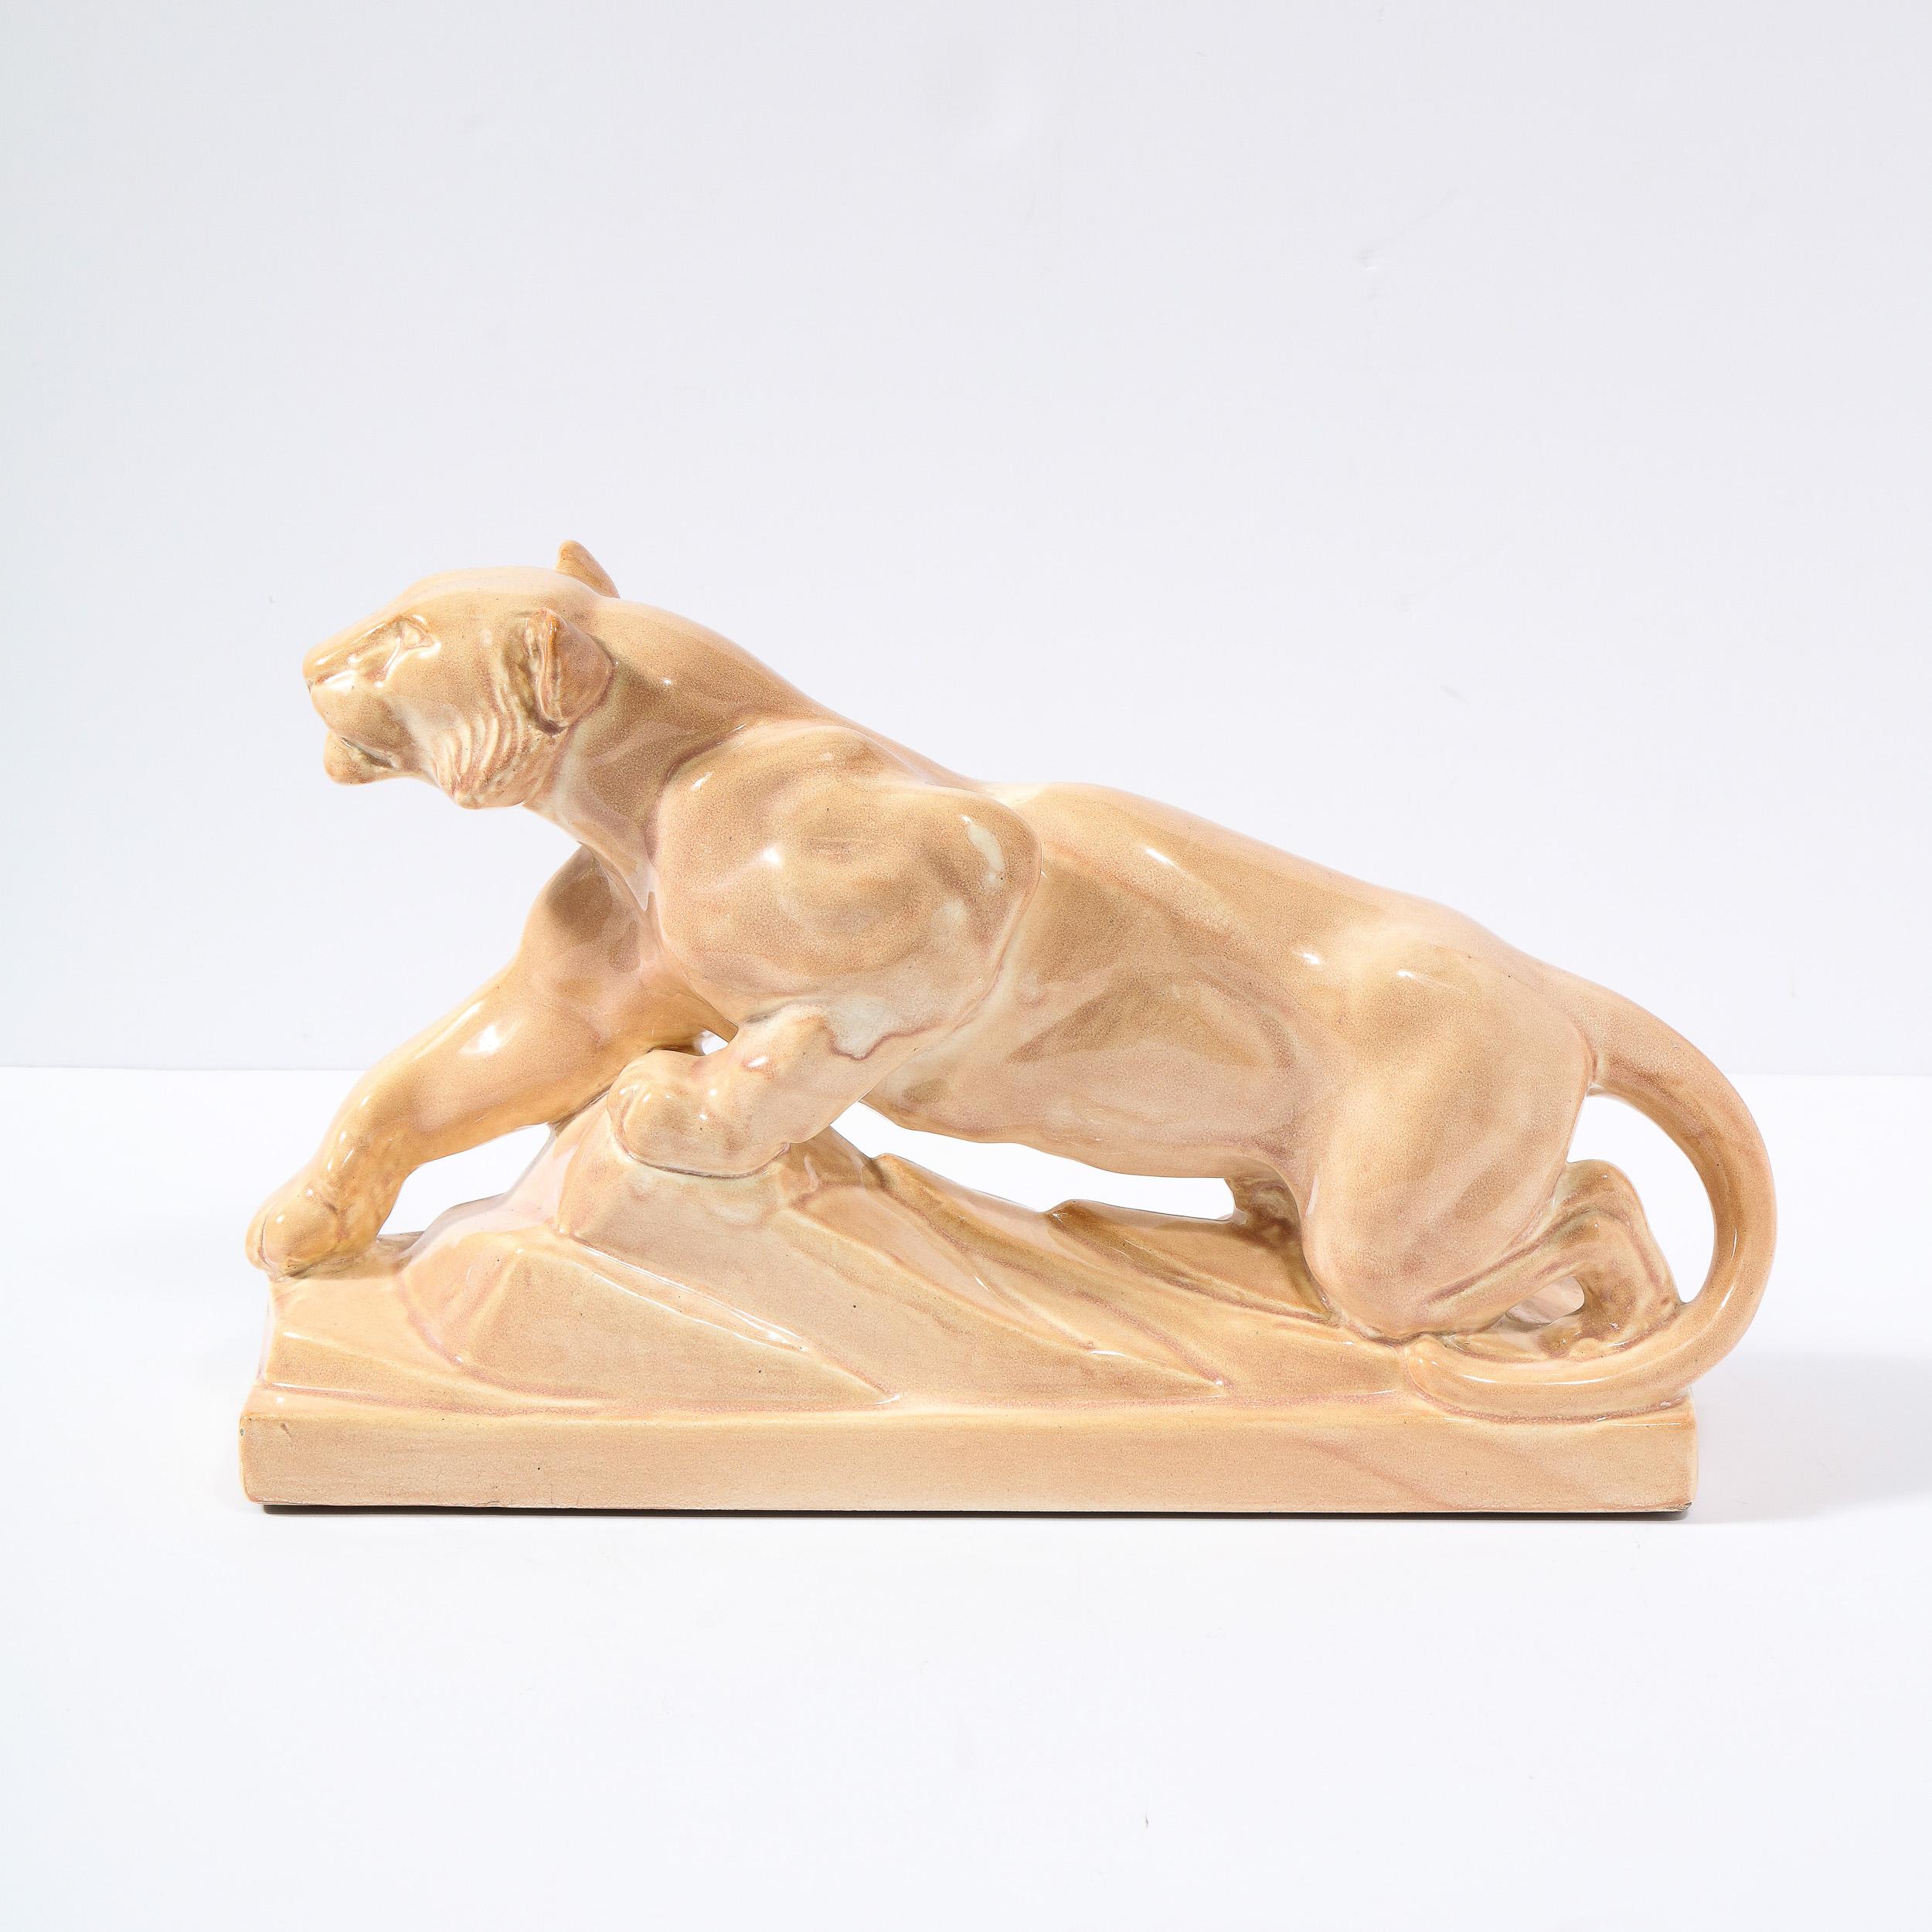 This stunning sculpture of an Art Deco Pouncing Tiger is realized in a pale terra-cotta glaze ceramic .It features a stylized Tiger on a stepped geometric base echoing the design of a cliff. The crackeluture of the glaze gives it that warm luminous